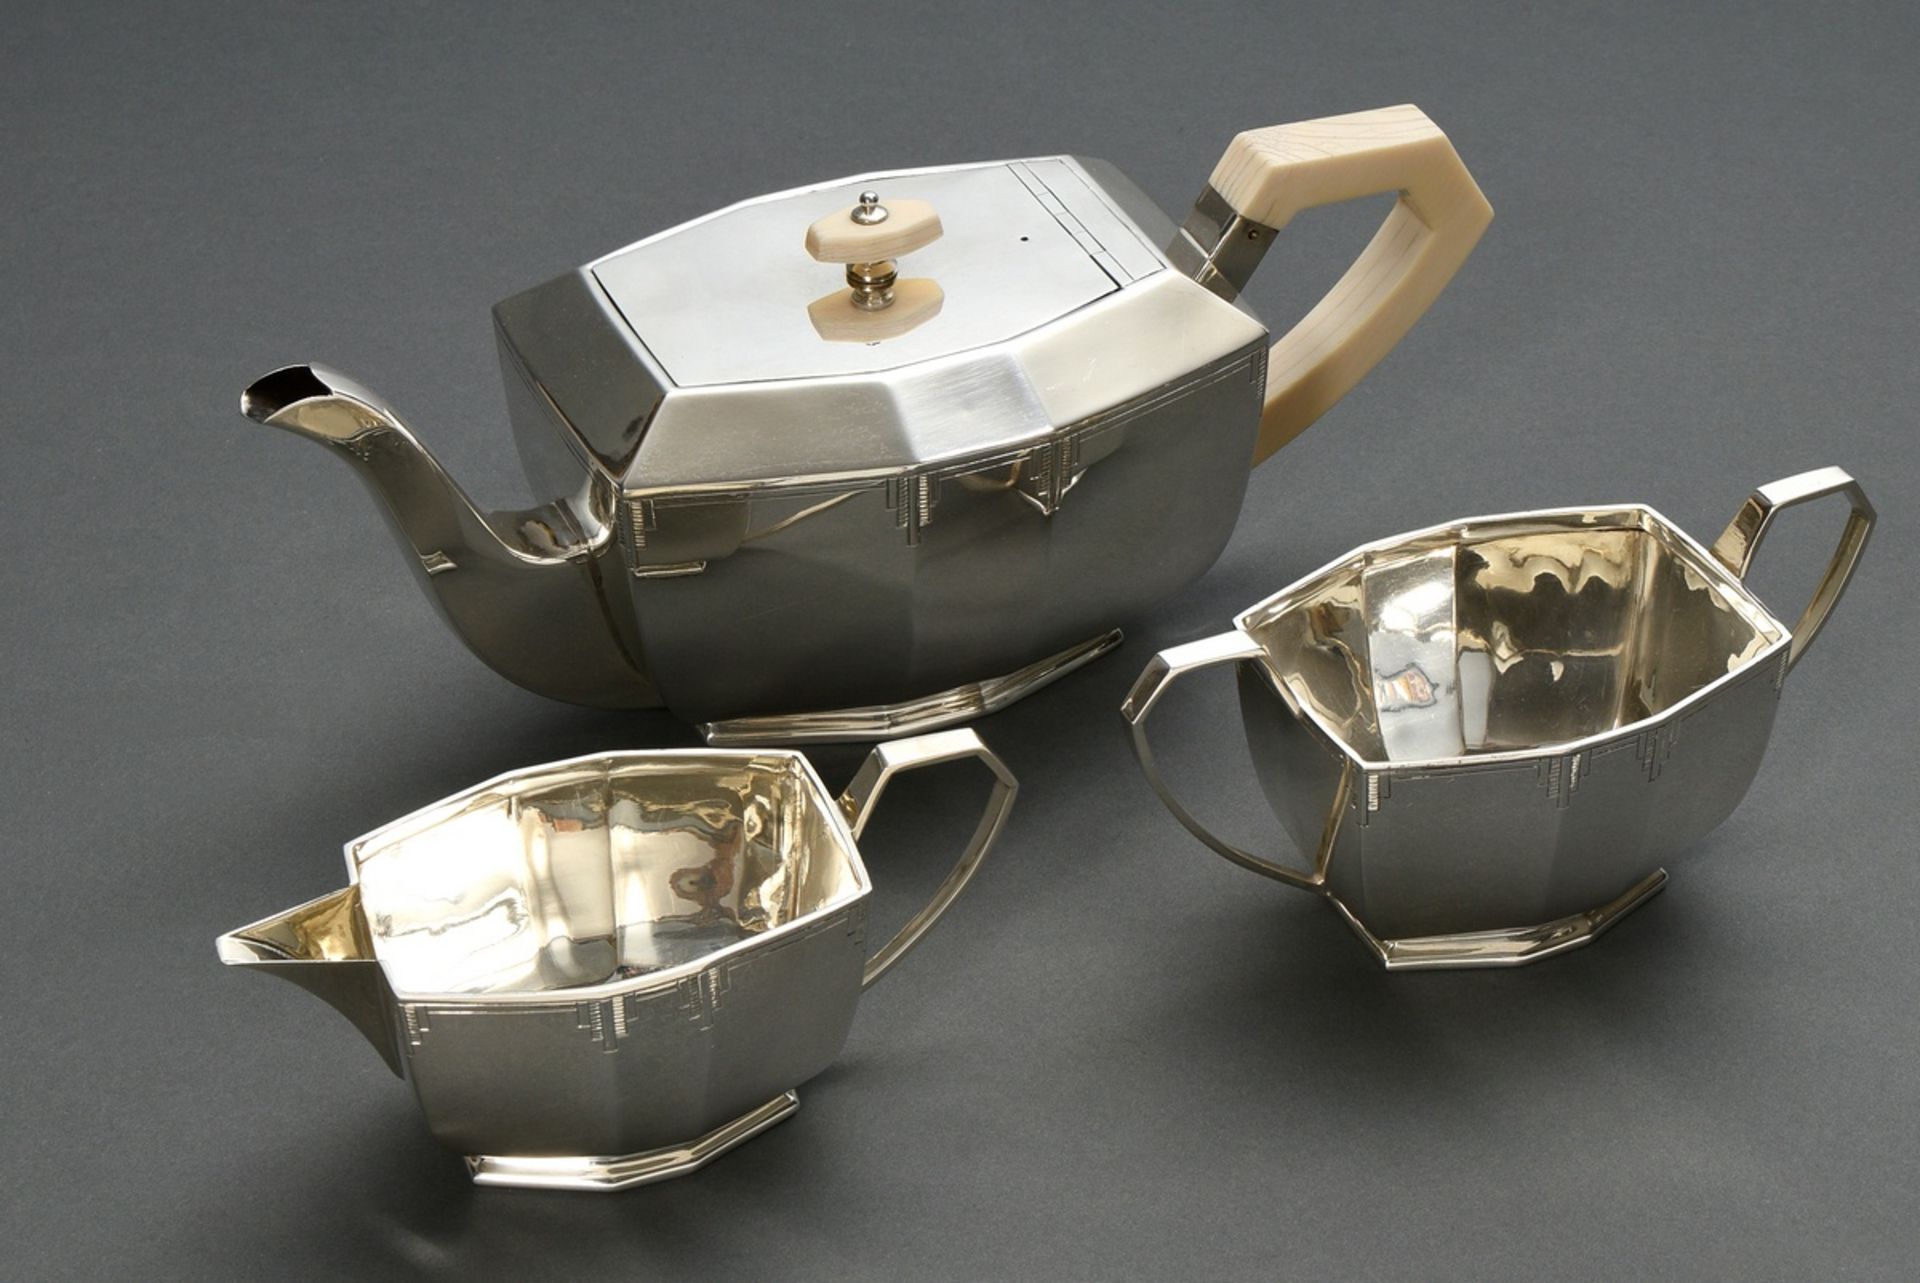 3 Piece Art Deco tea set in geometric abstract form: Pot with ivory knob and handle and 2 parts sug - Image 2 of 8